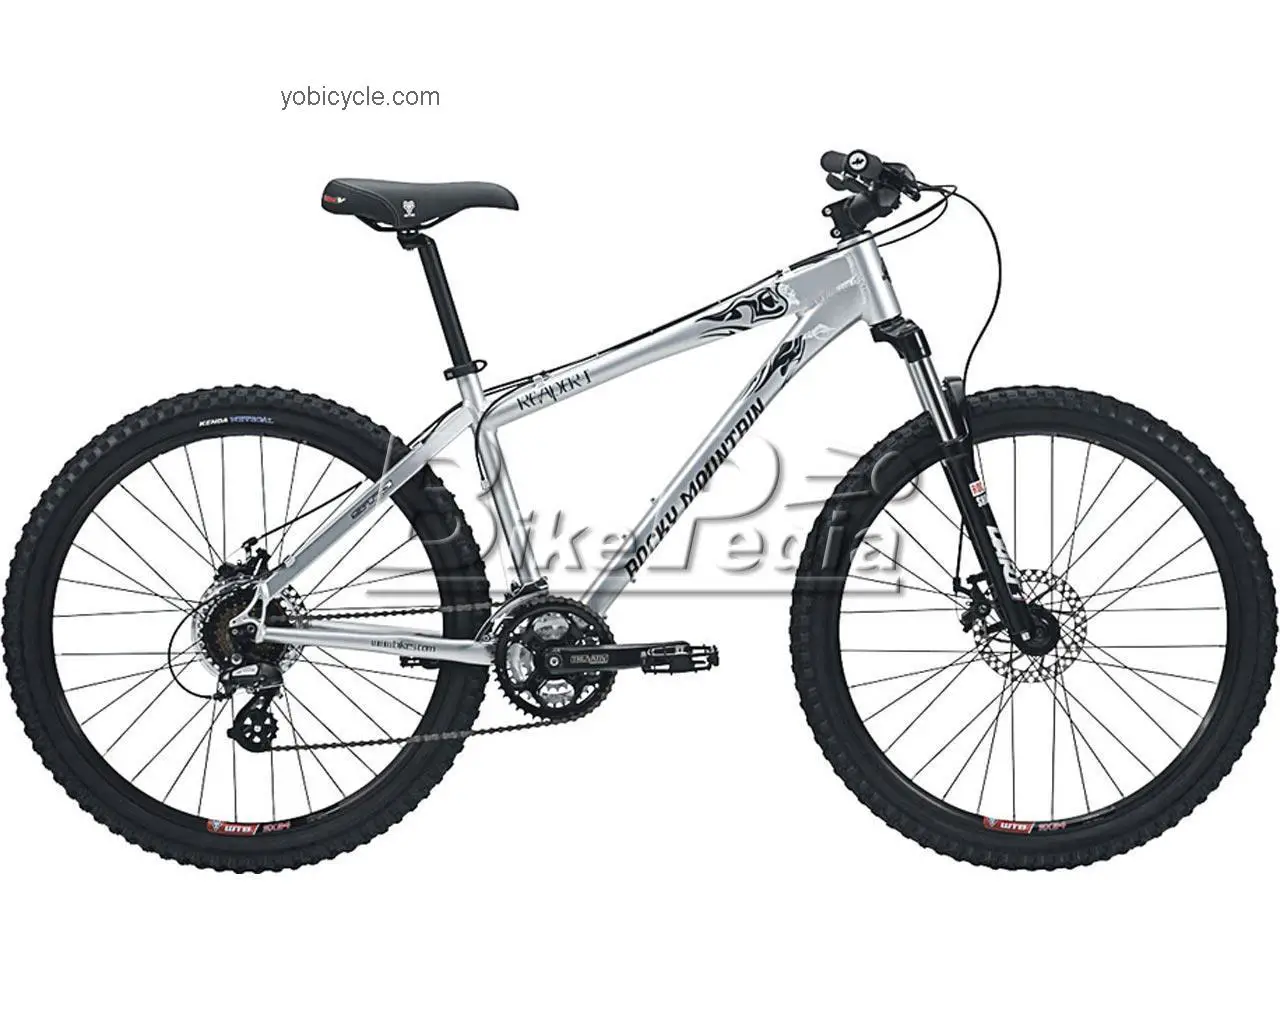 Rocky Mountain Reaper I 2009 comparison online with competitors